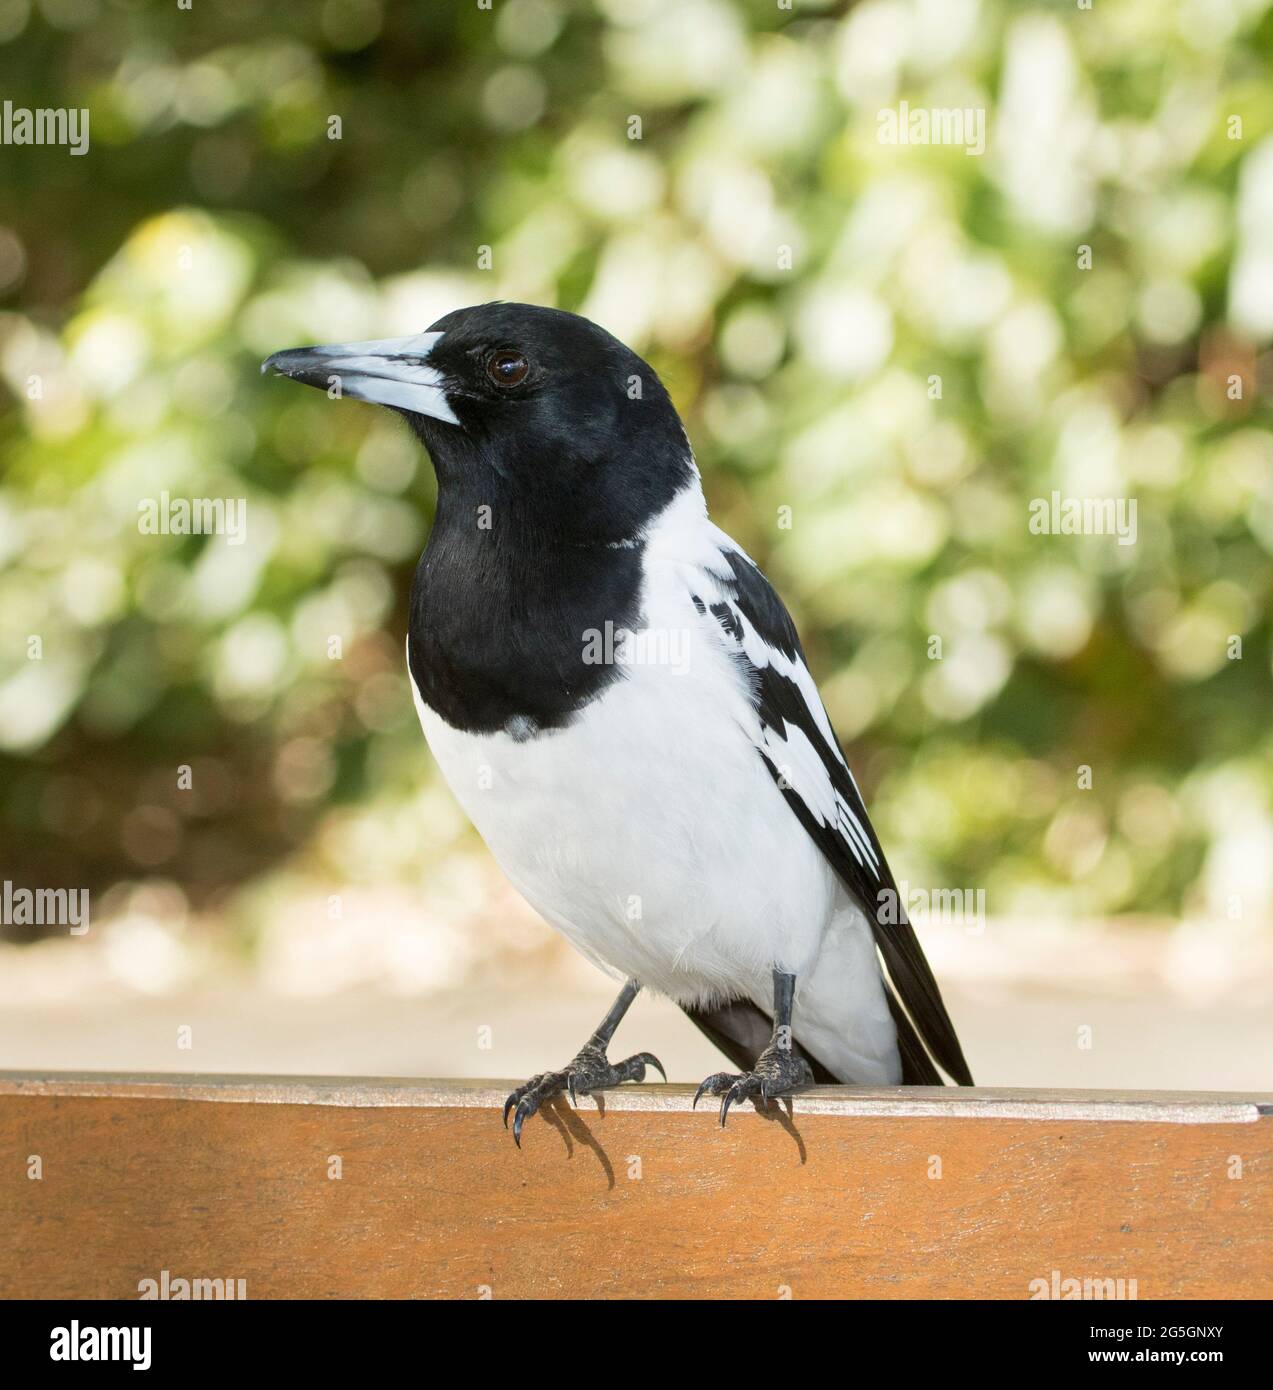 Pied Butcherbird, Cracticus nigrogularis, with alert expression, on a bench against a background of green foliage in a city park in Australia Stock Photo